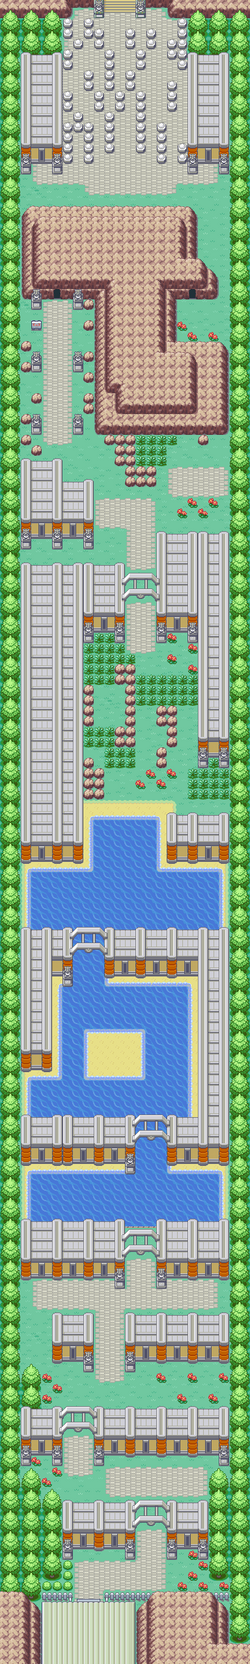 Kanto Route 23 FRLG.png